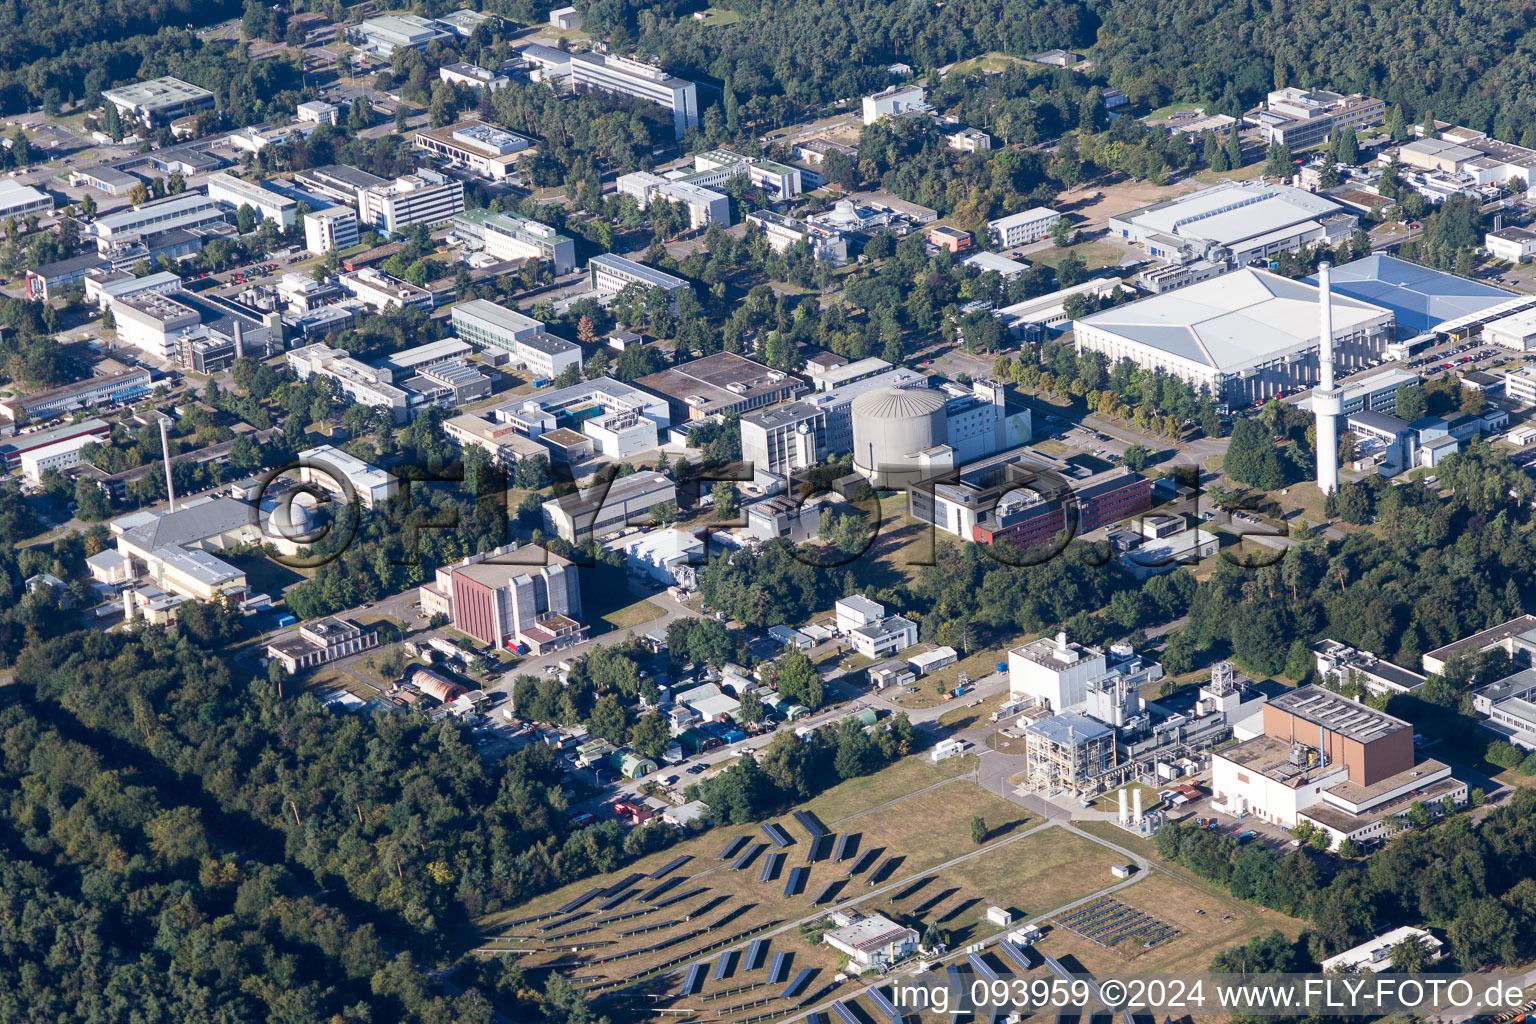 Campus building of the university KIT - Campus Nord (former Nuclear research centre Karlsruhe) in the district Leopoldshafen in Eggenstein-Leopoldshafen in the state Baden-Wurttemberg, Germany from above